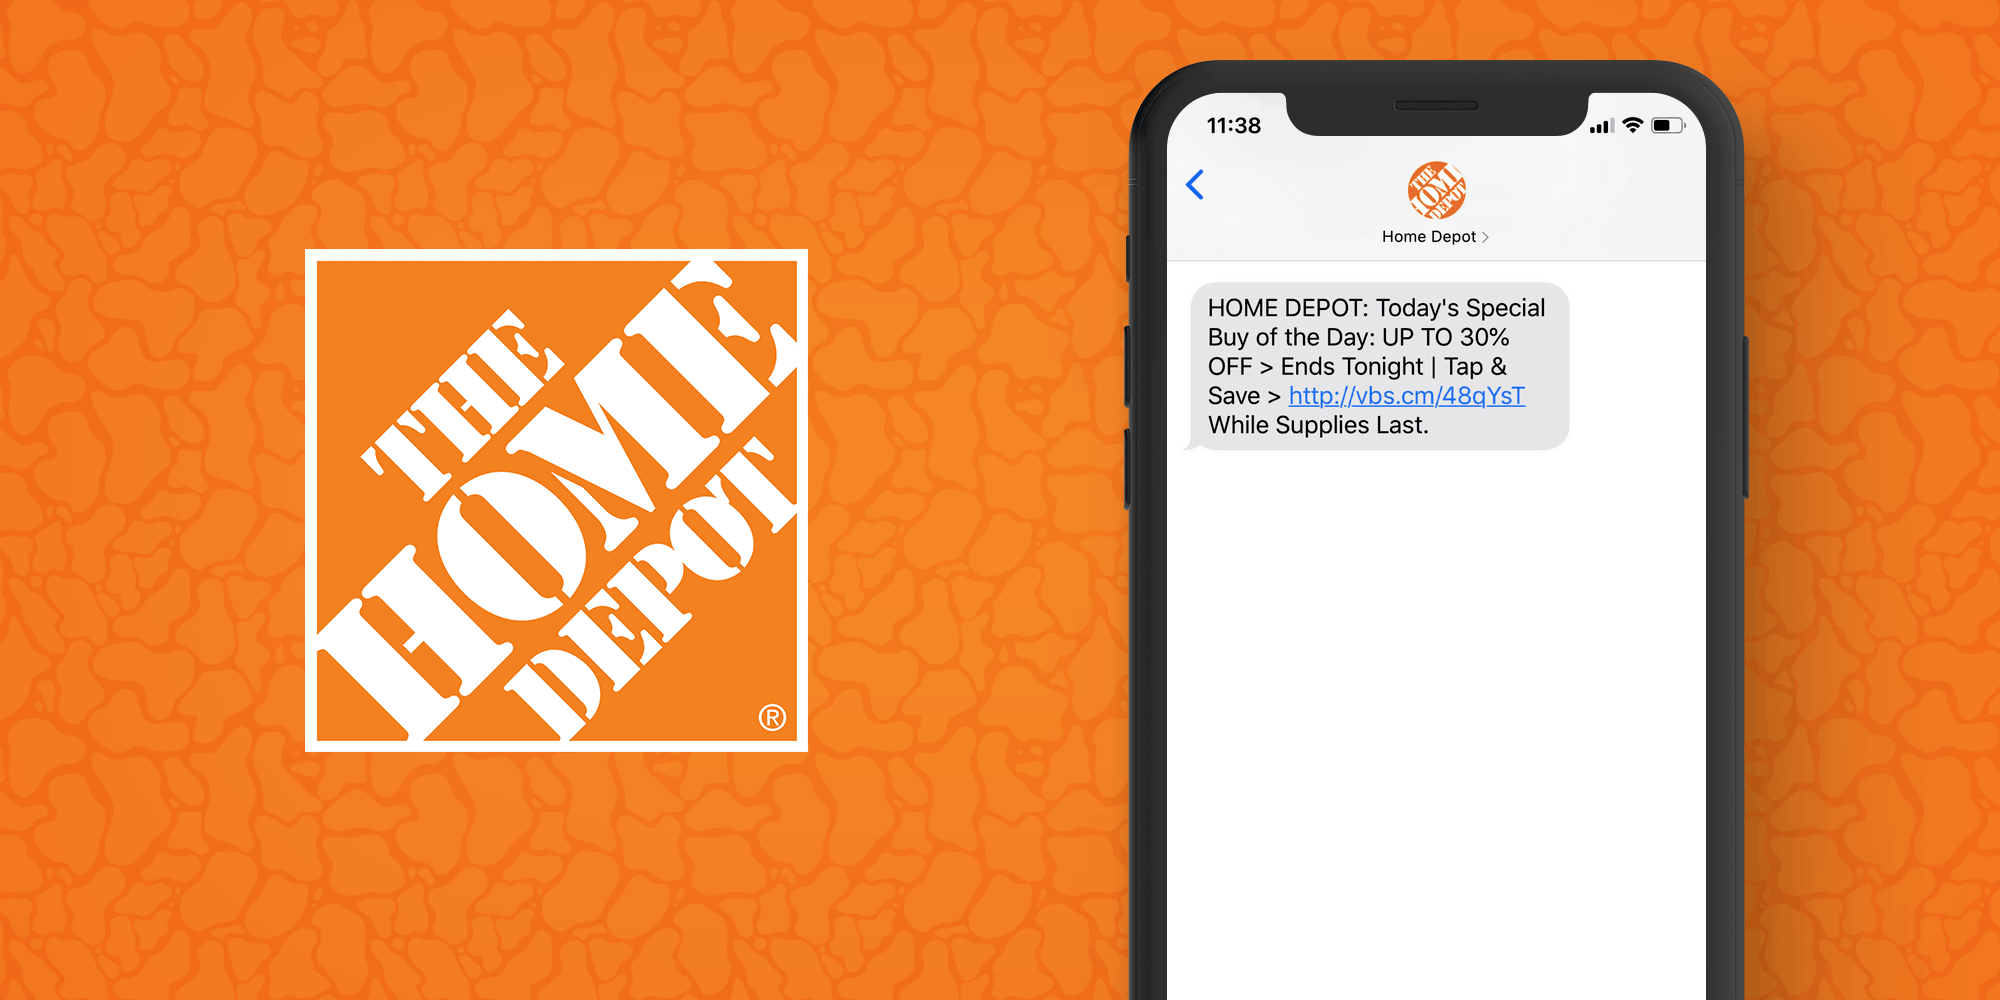 Home Depot SMS Marketing Example - 50 Examples of Brands Using SMS Marketing